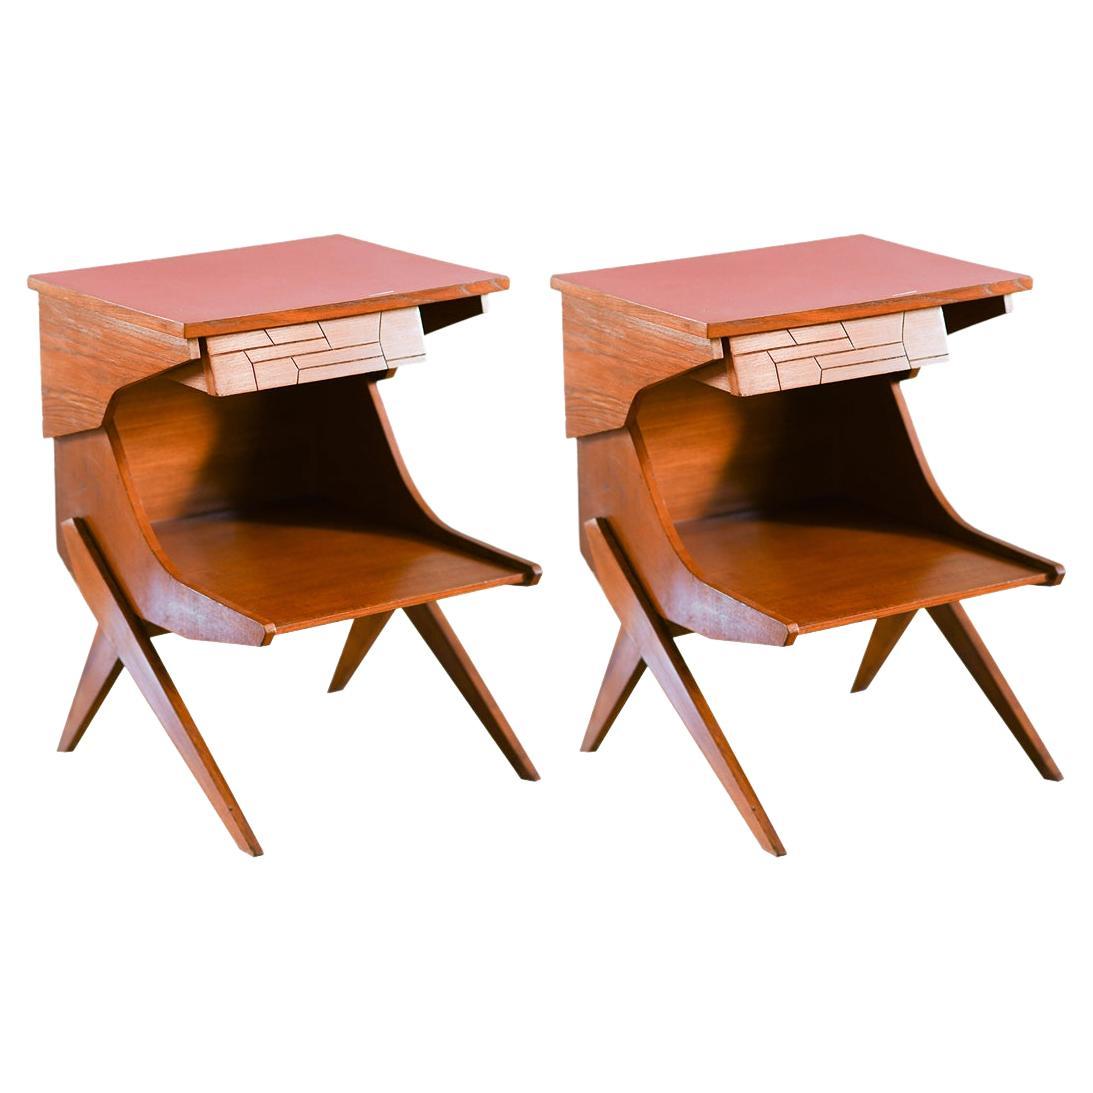 Pair of Wooden Bedside Tables with Colored Formica Top, 1950 'Set of 2' For Sale